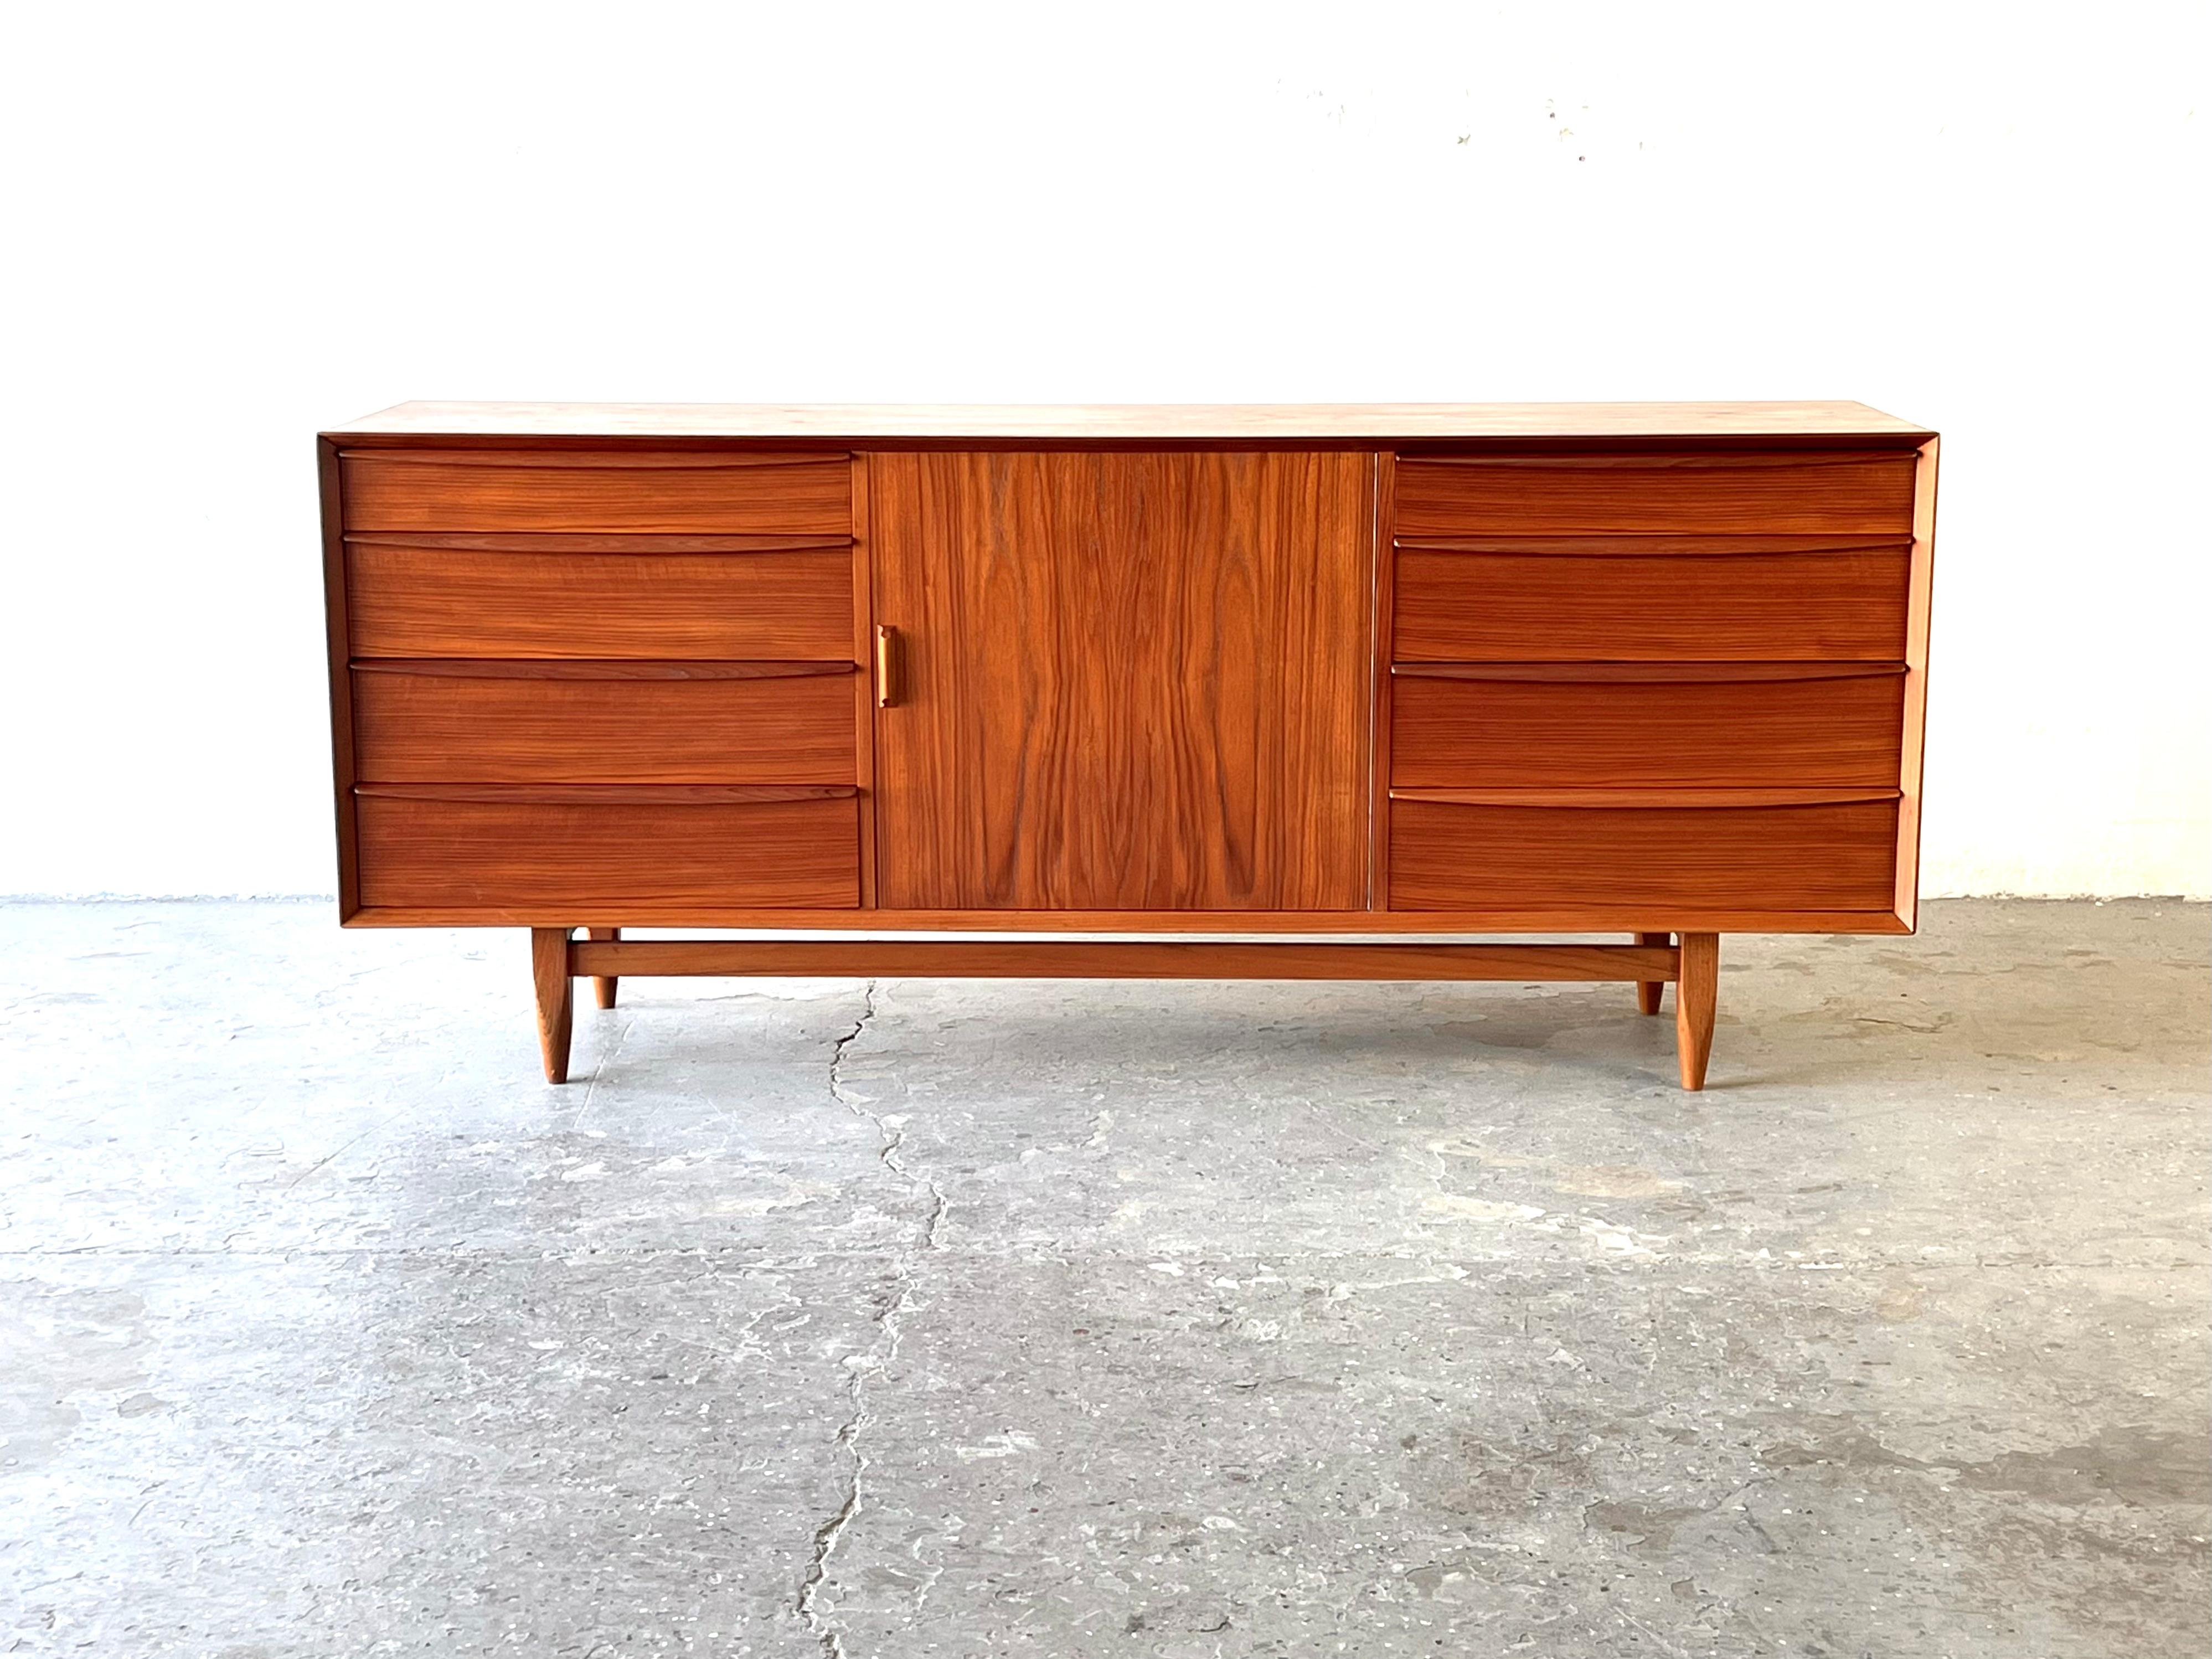 Large Svend Åge Madsen Danish teak credenza For Falster Møbelfabrik


Denmark, ca. 1960s. A beautifully made teak sideboard or credenza designed by Svend Åge Madsen for Falster Møbelfabrik. Features eight generous drawers with sculptural, flared